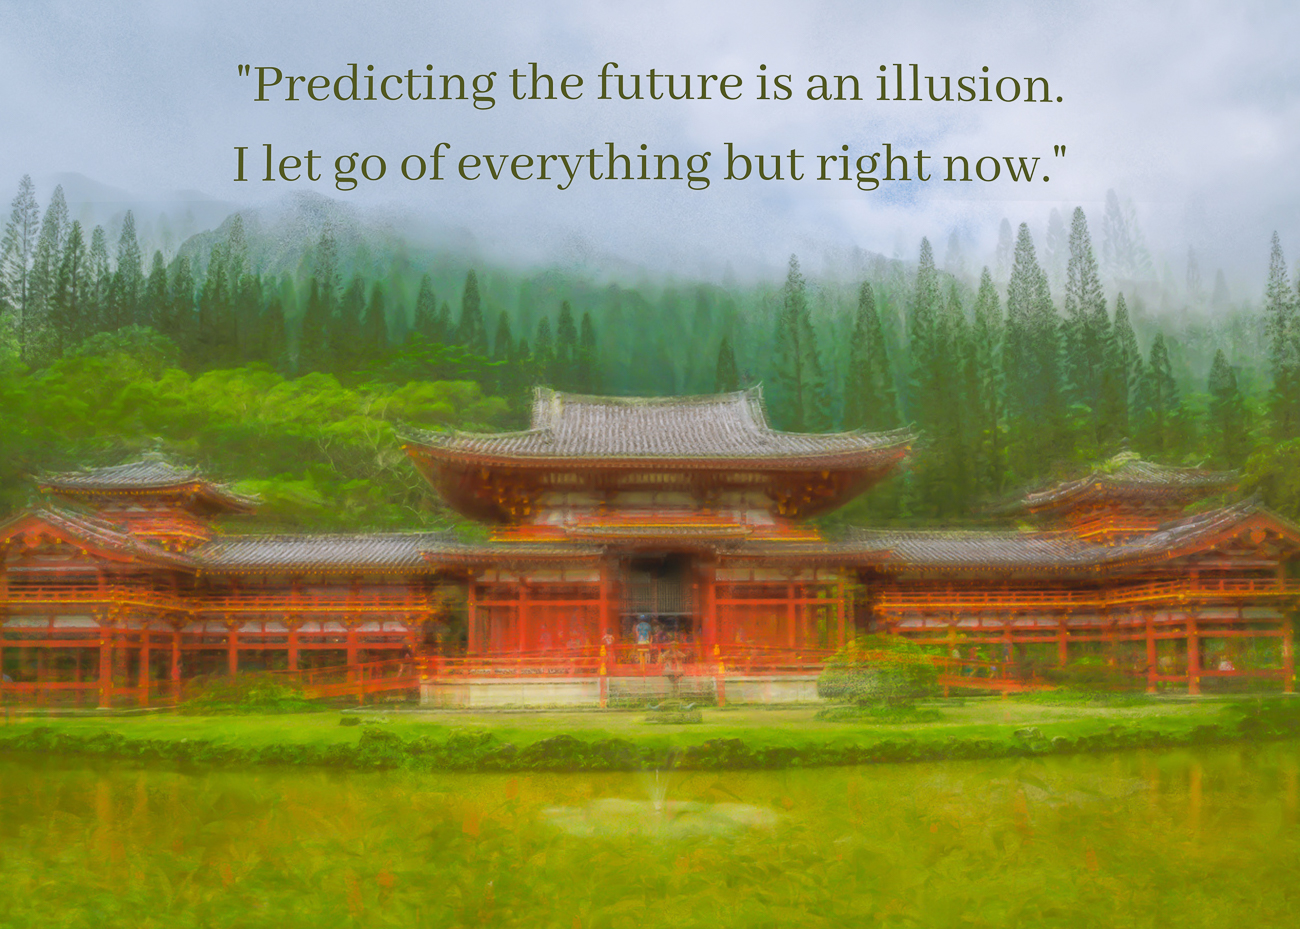 A photo of a Buddhist Temple and an affirmation to let go and be present.